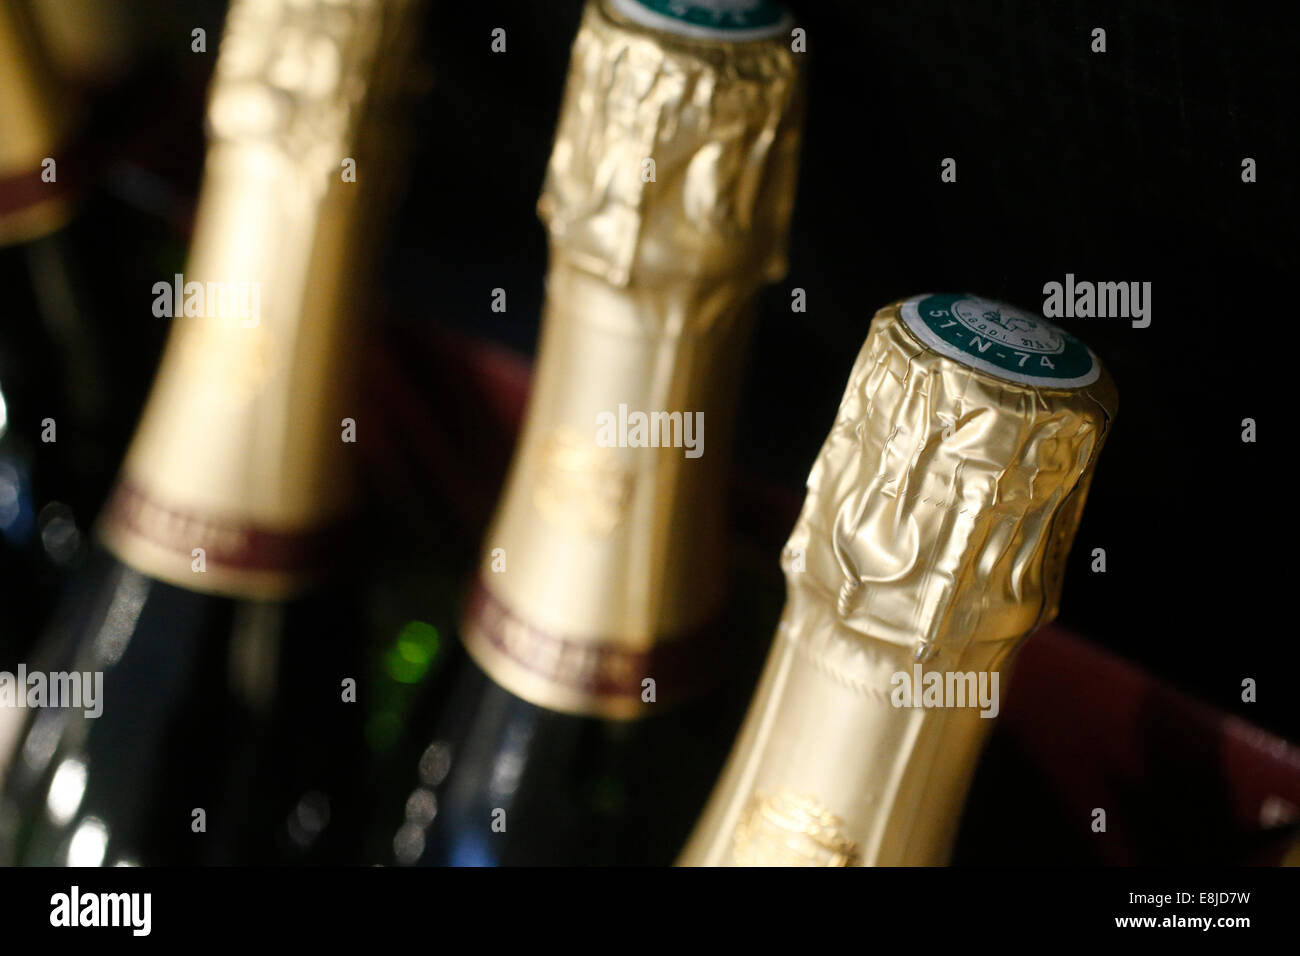 Bottles of champagne. Stock Photo